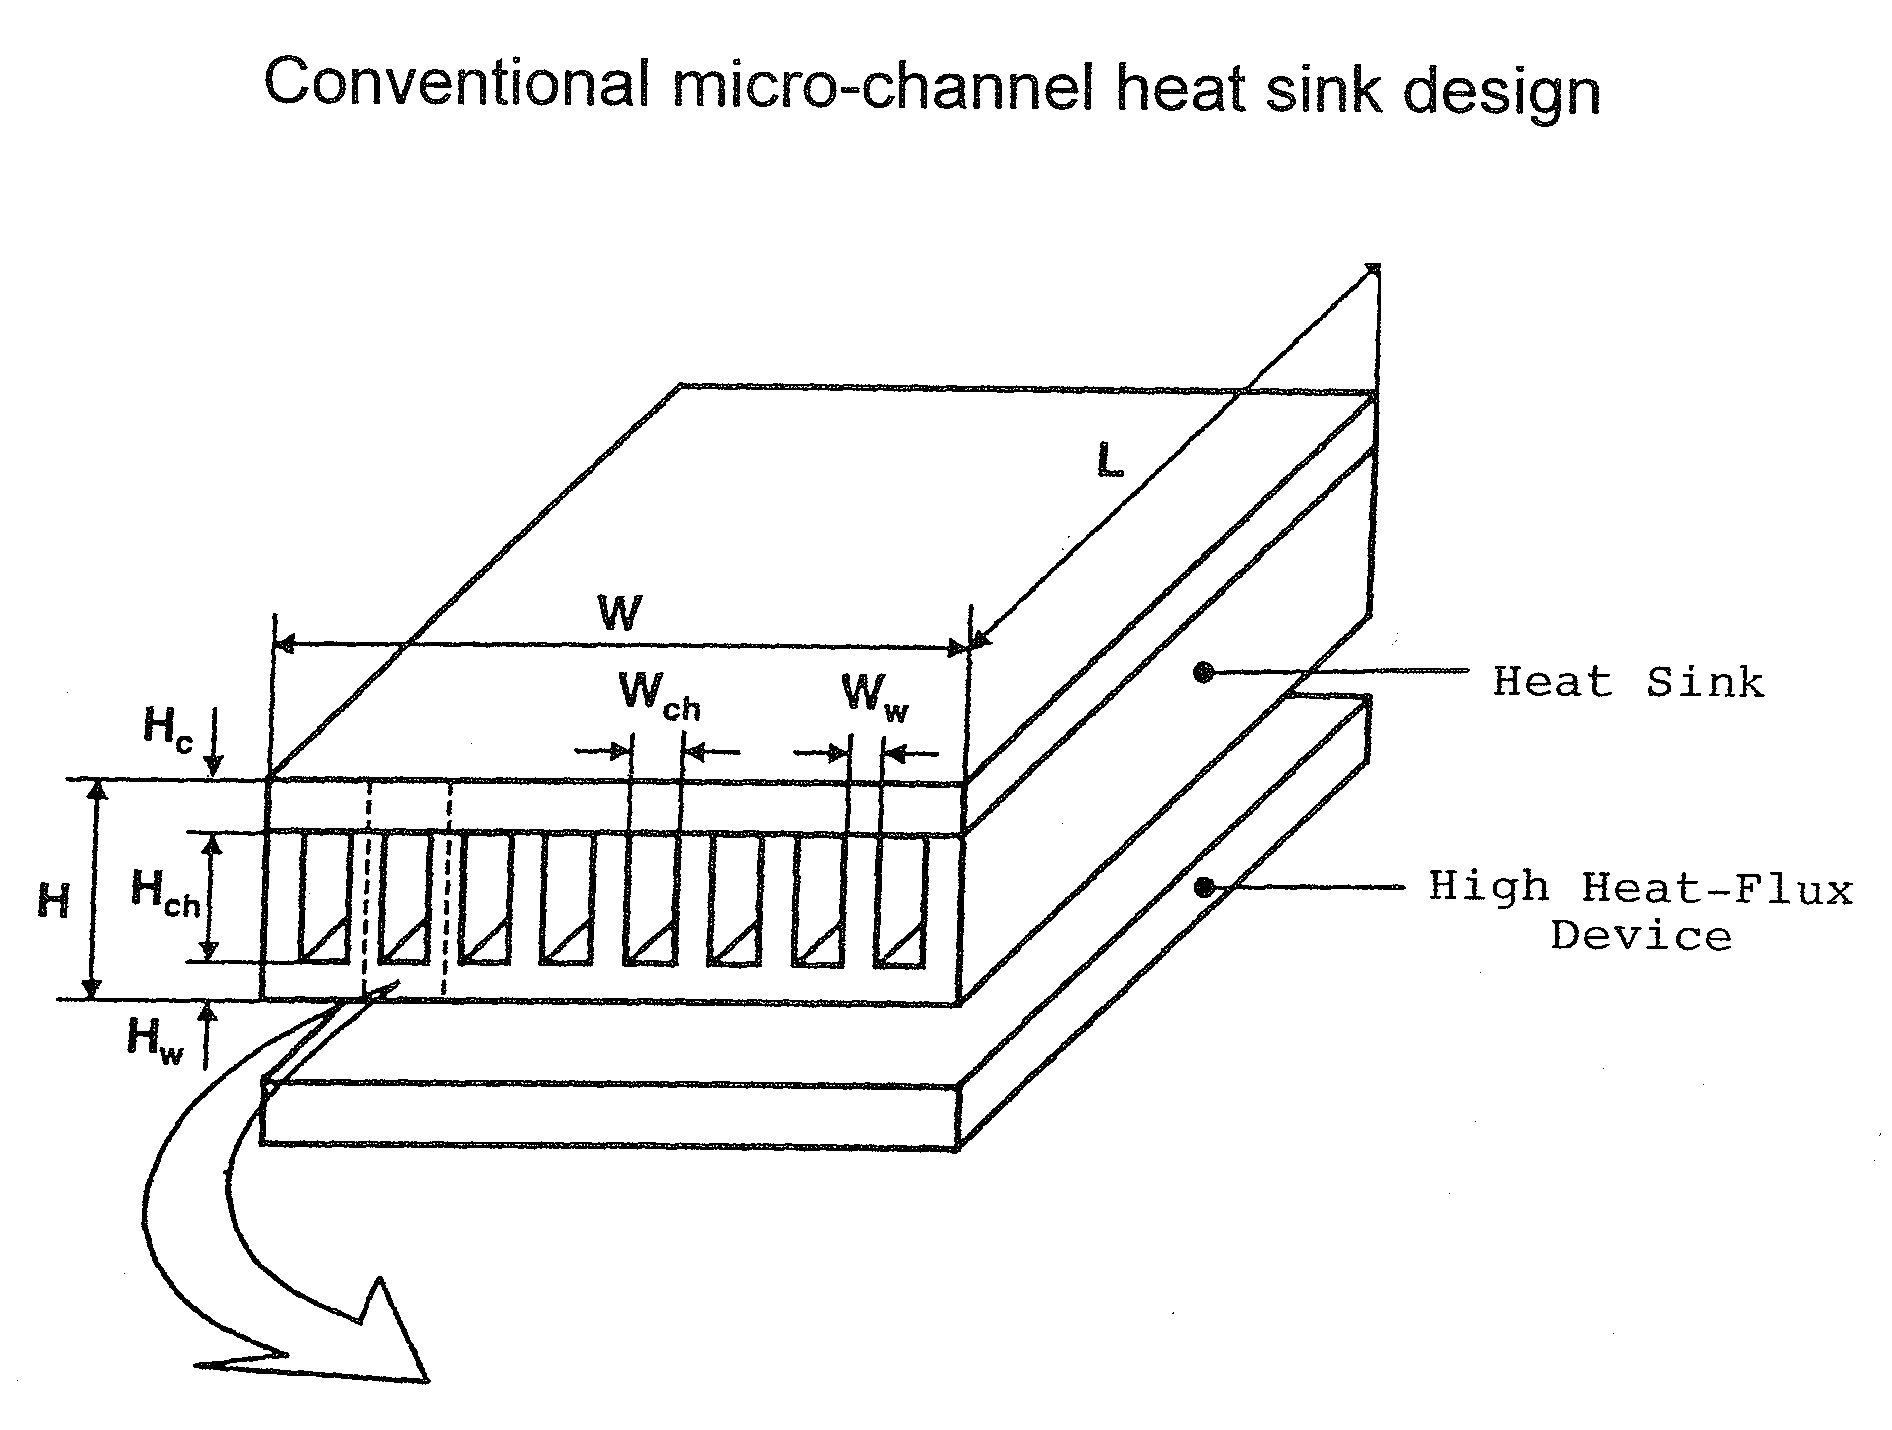 Two-phase cross-connected micro-channel heat sink